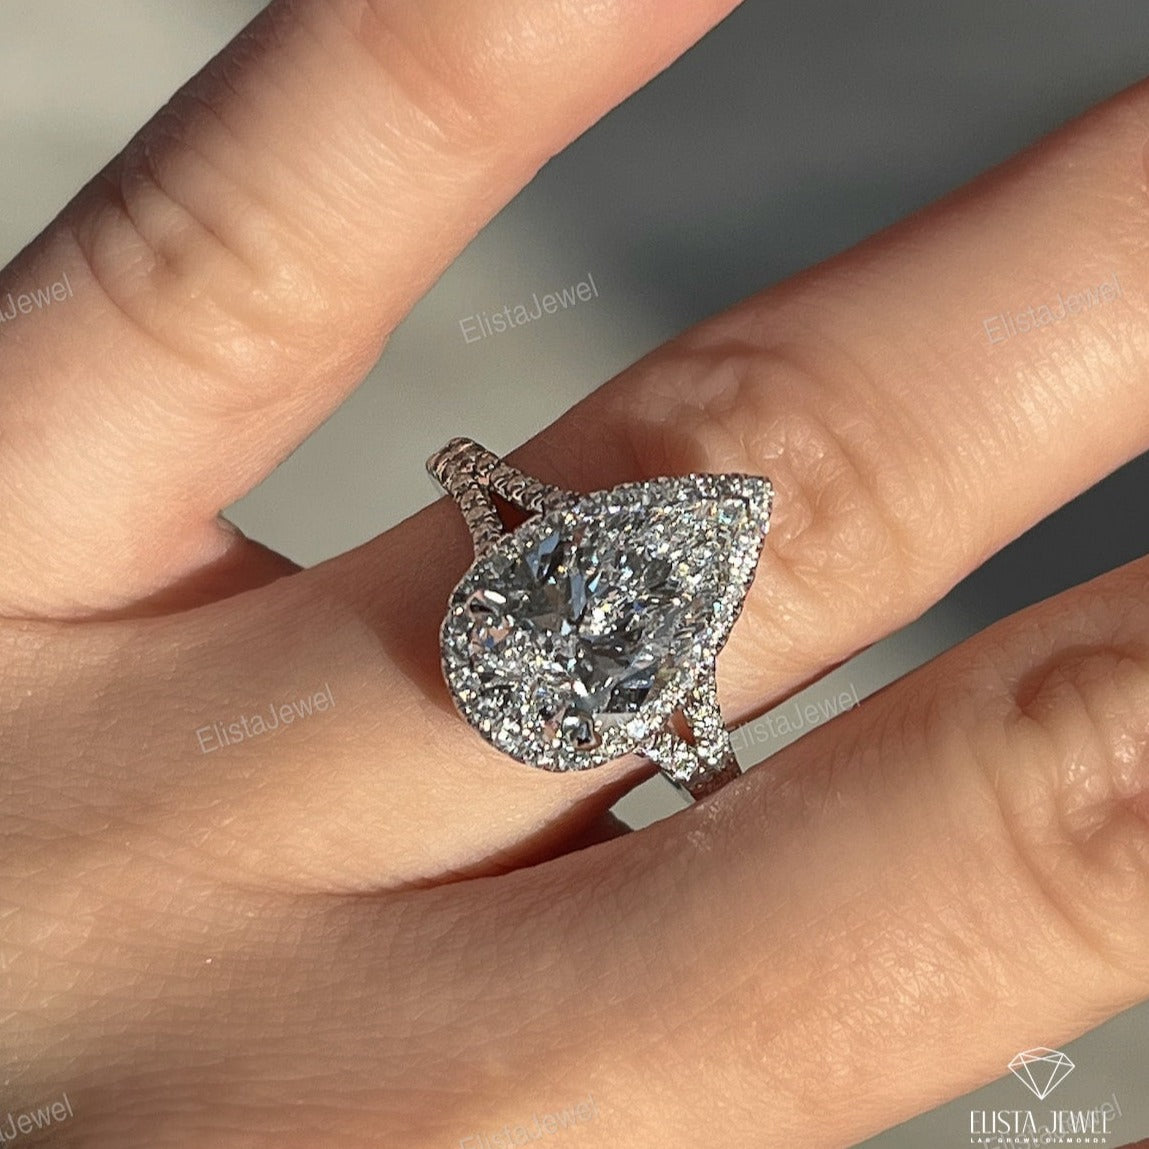 Pear Cut Halo Engagement Ring